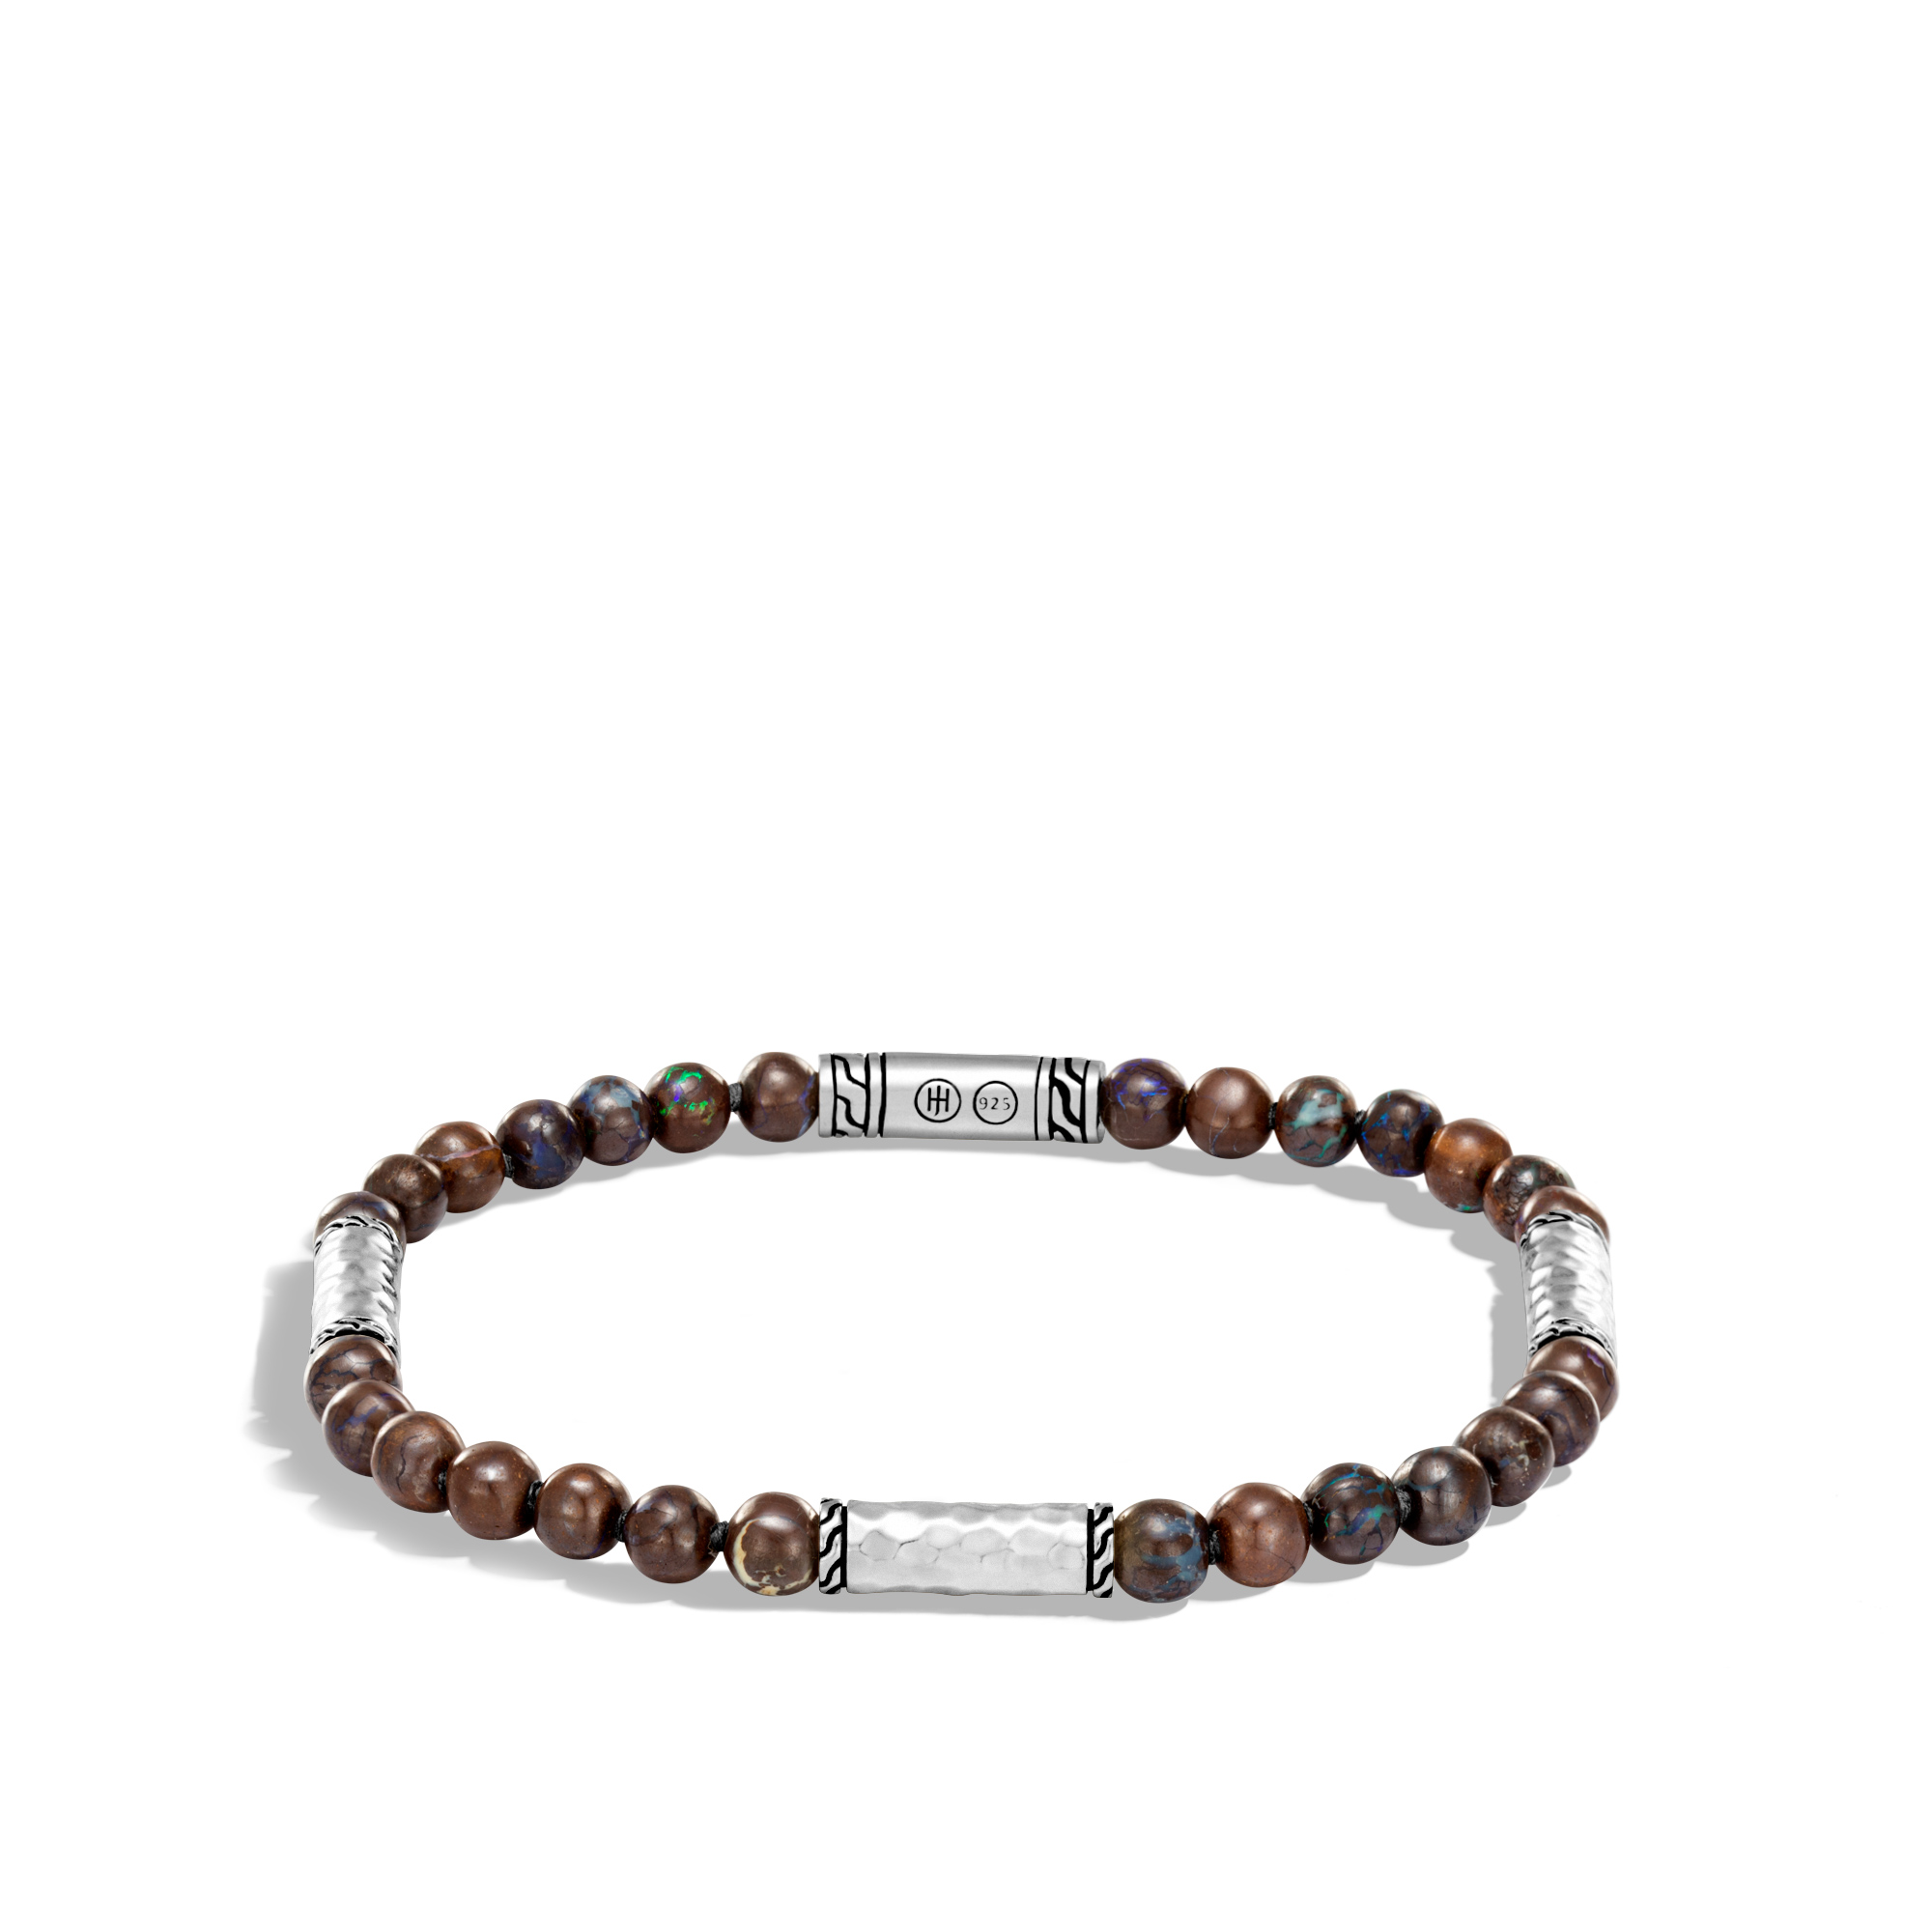 John Hardy: Sterling Silver Classic Chain Hammered Multi Station With 26 5mm Boulder Opal Beads Pusher Clasp
Length: 8